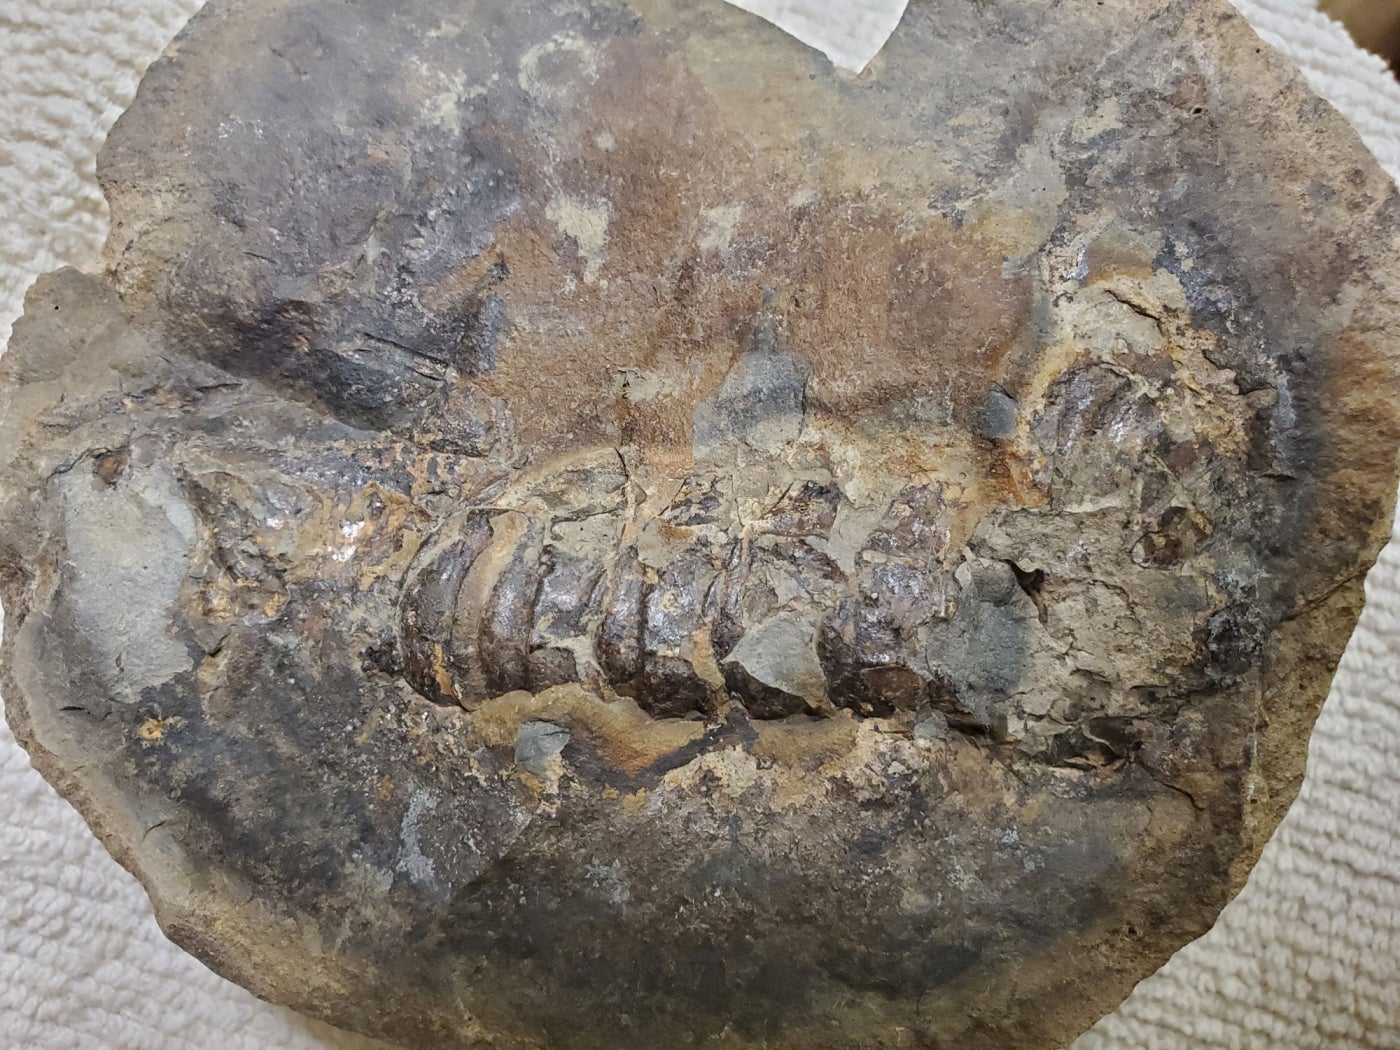 A 75-million-year-old lobster fossil. The ridges of its fossilized tail are visible in the piece of rock.